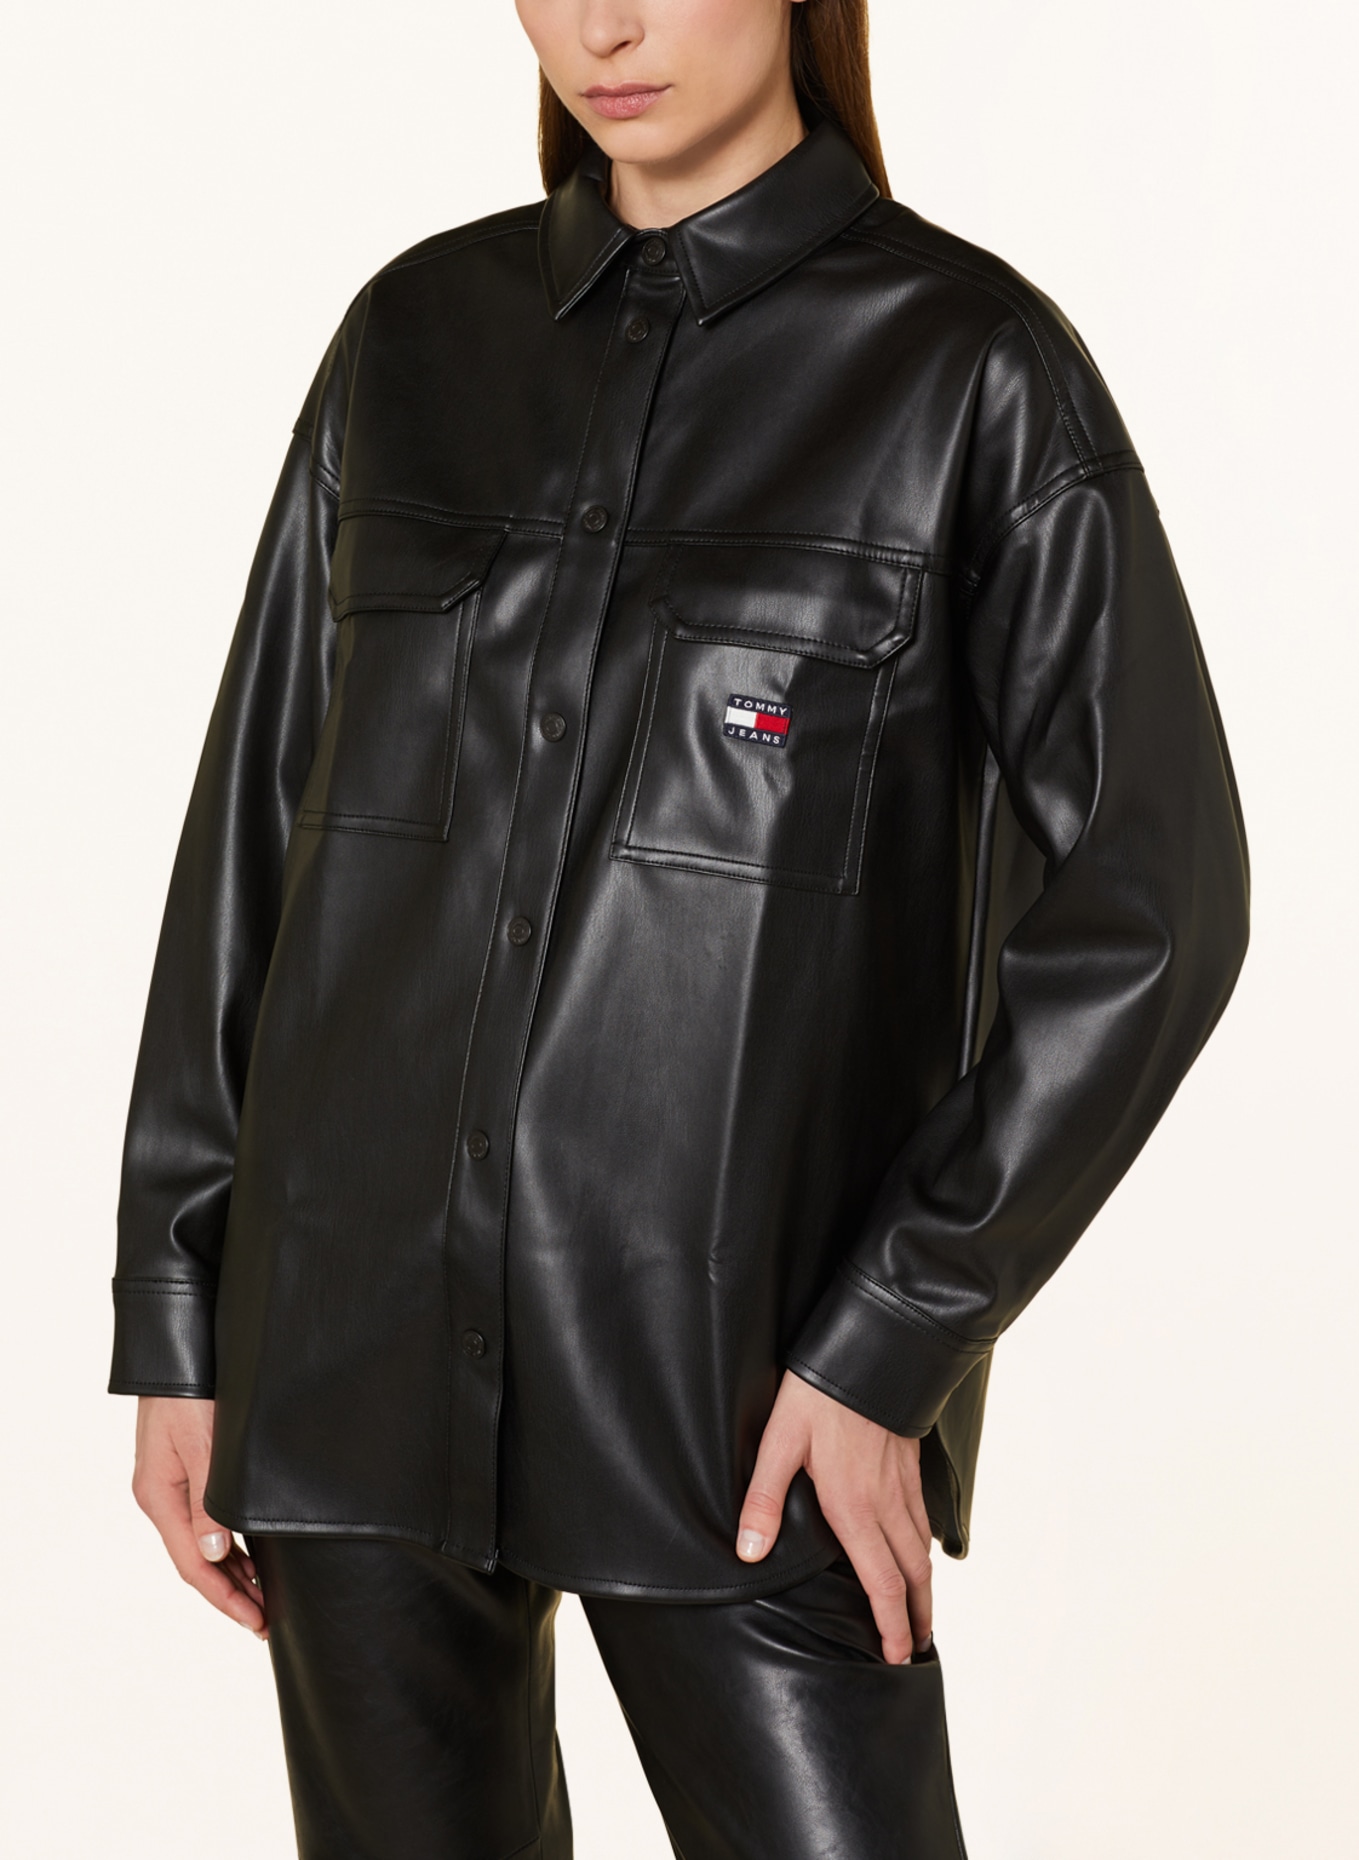 TOMMY JEANS Overshirt in leather look in black